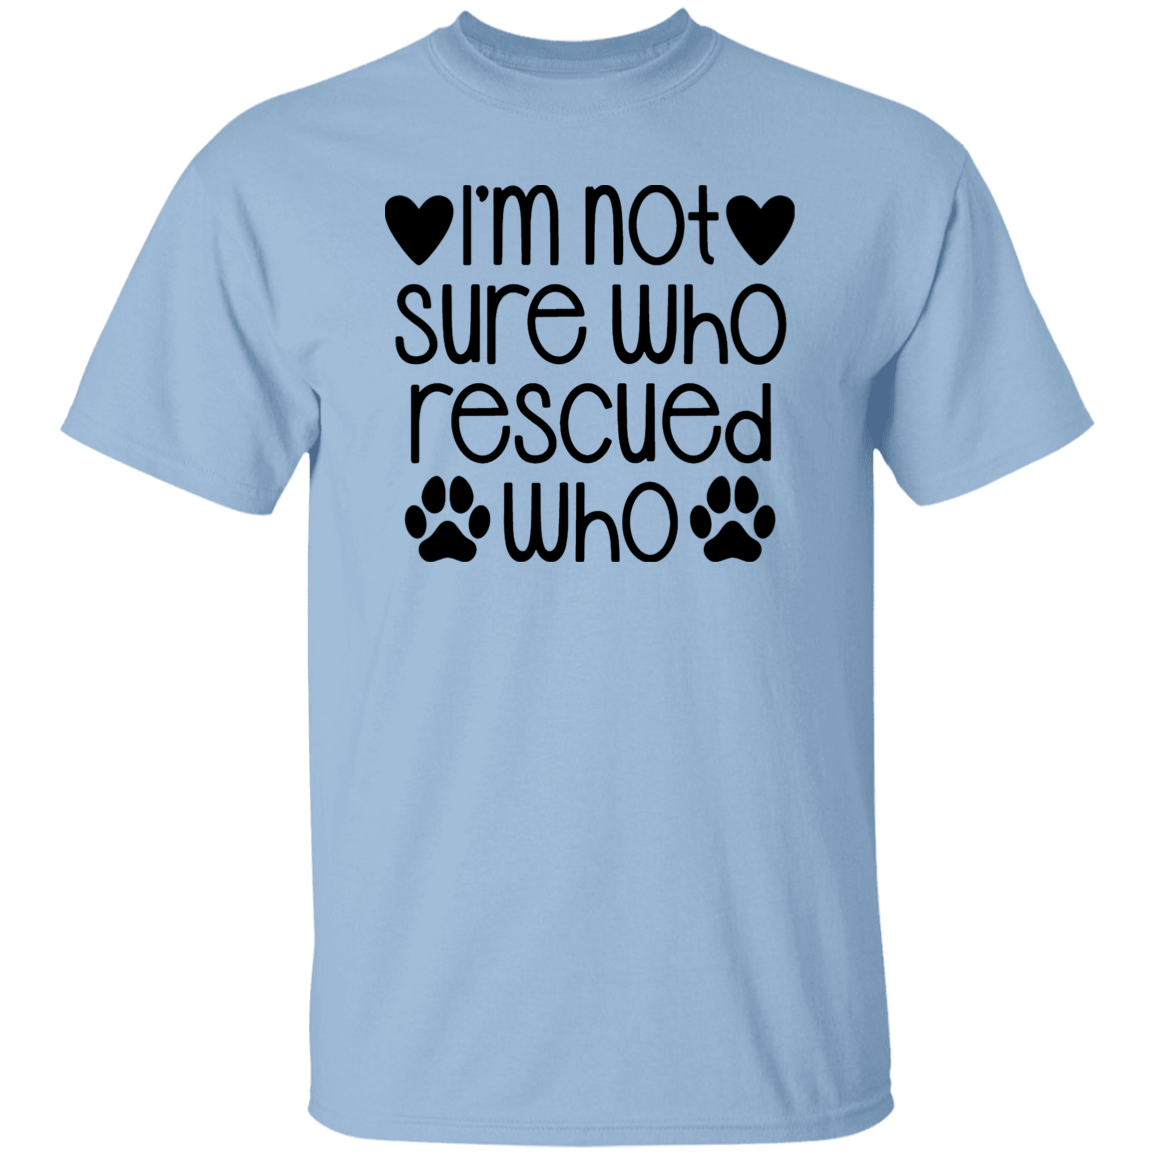 Who Rescued Who Unisex Tee